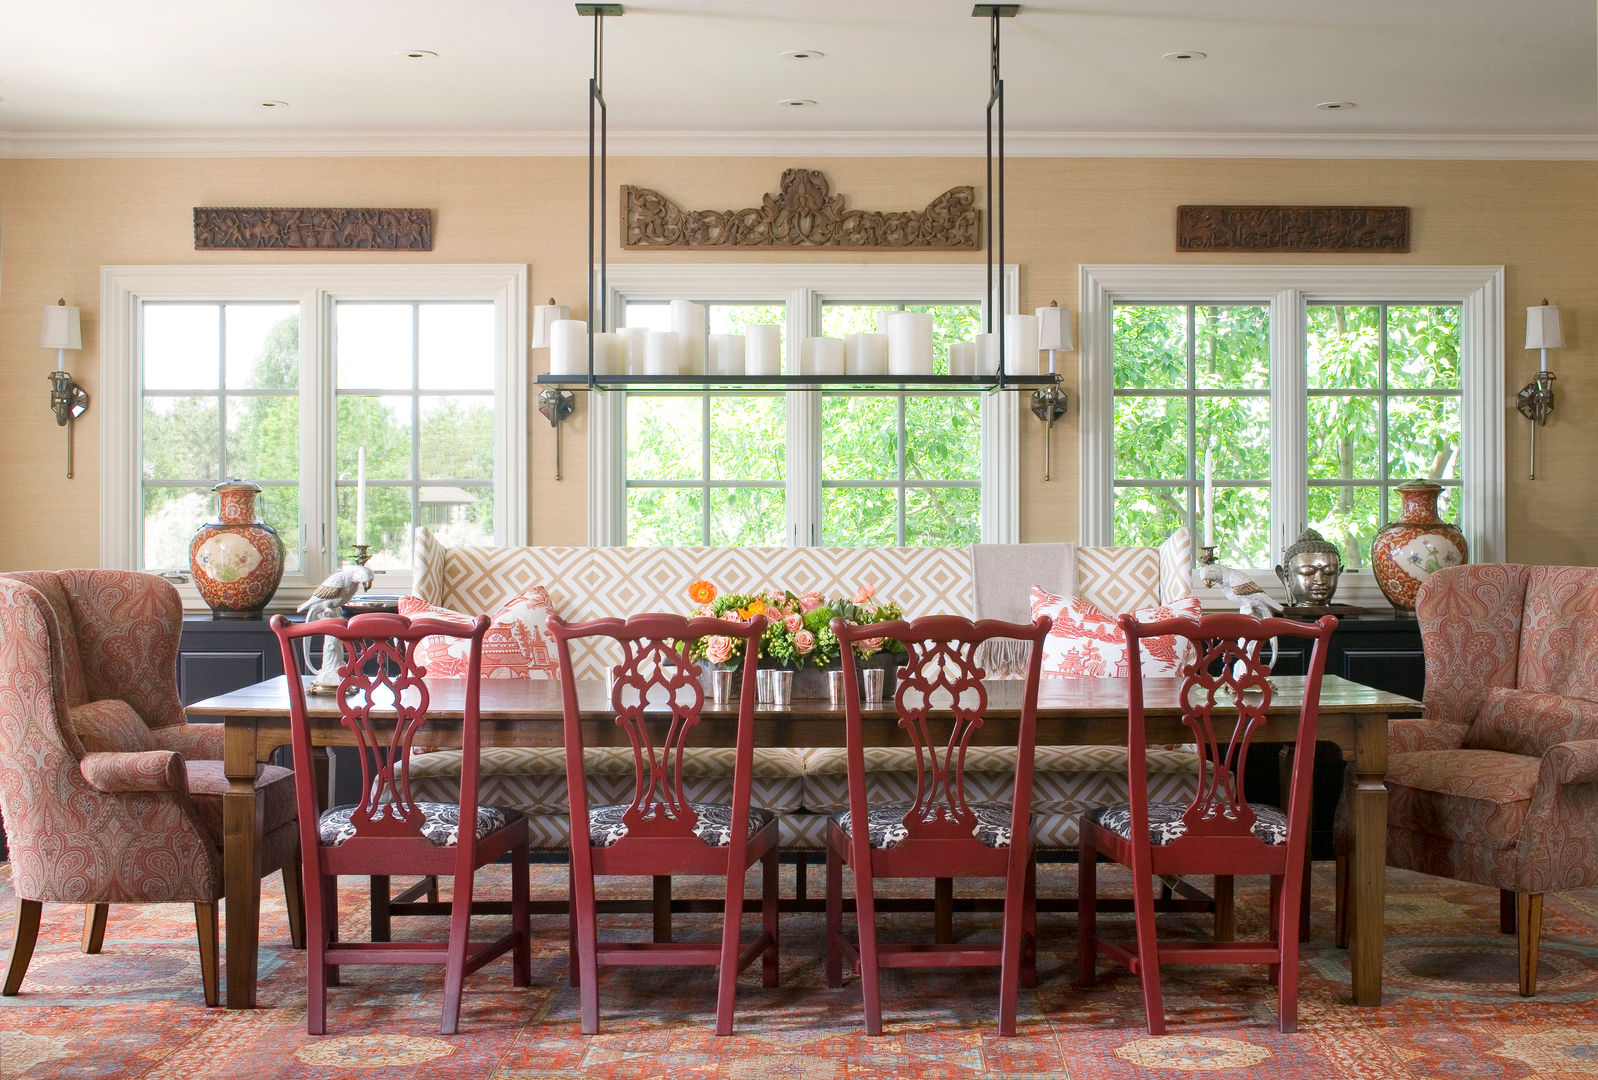 Home of the Year, Andrea Schumacher Interiors Andrea Schumacher Interiors Comedores de estilo clásico